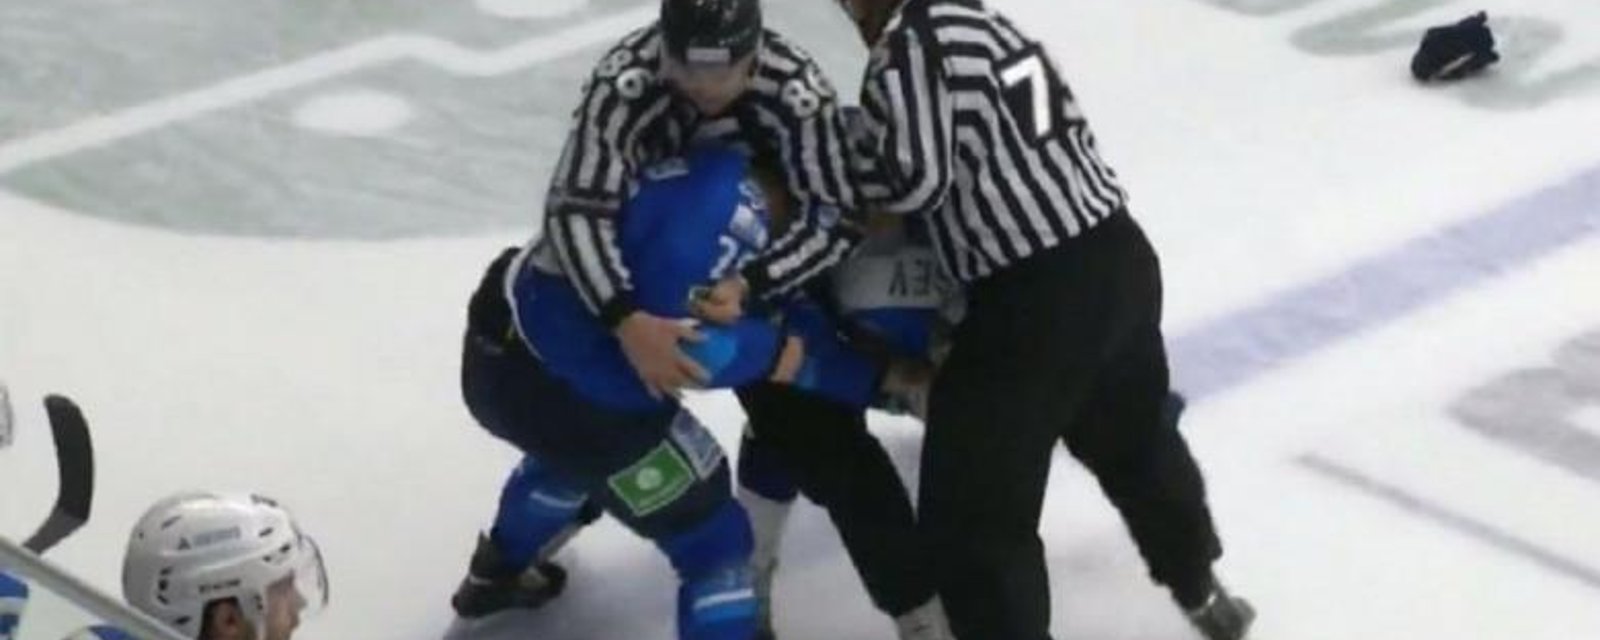 Police reports filled and charges forthcoming after insane incident in Russian hockey.